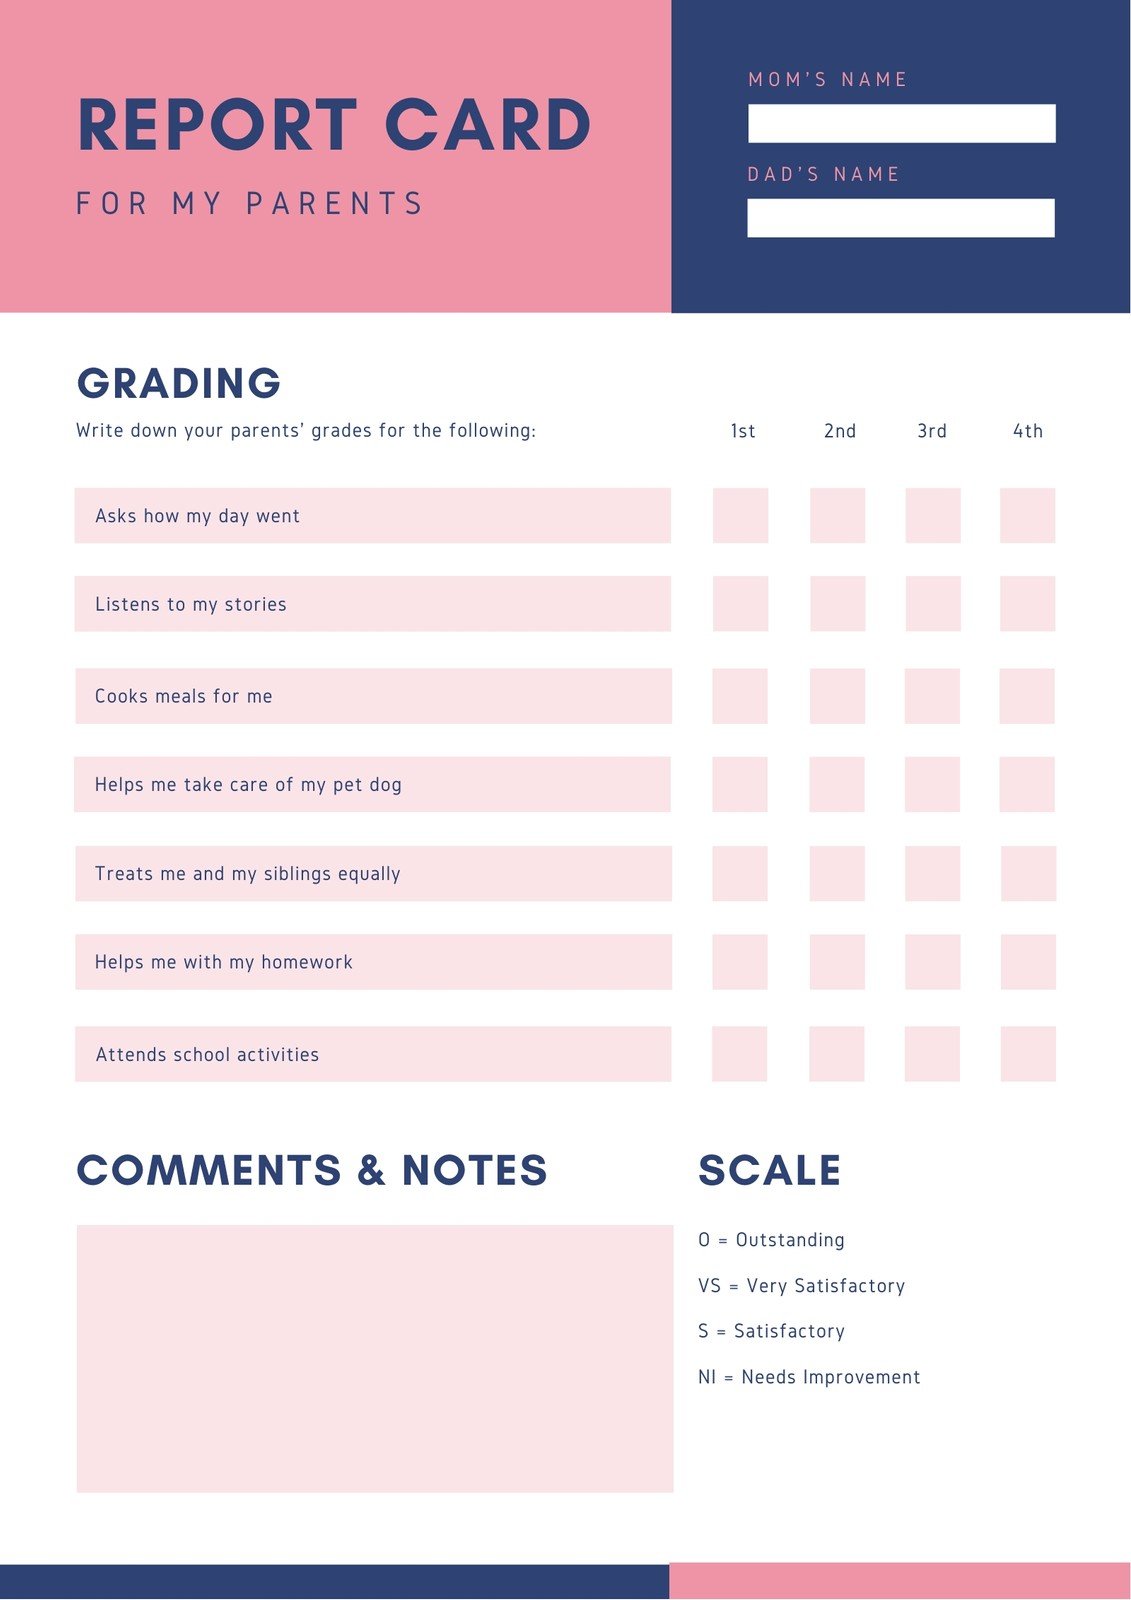 Free custom printable parent report card templates  Canva Intended For Boyfriend Report Card Template